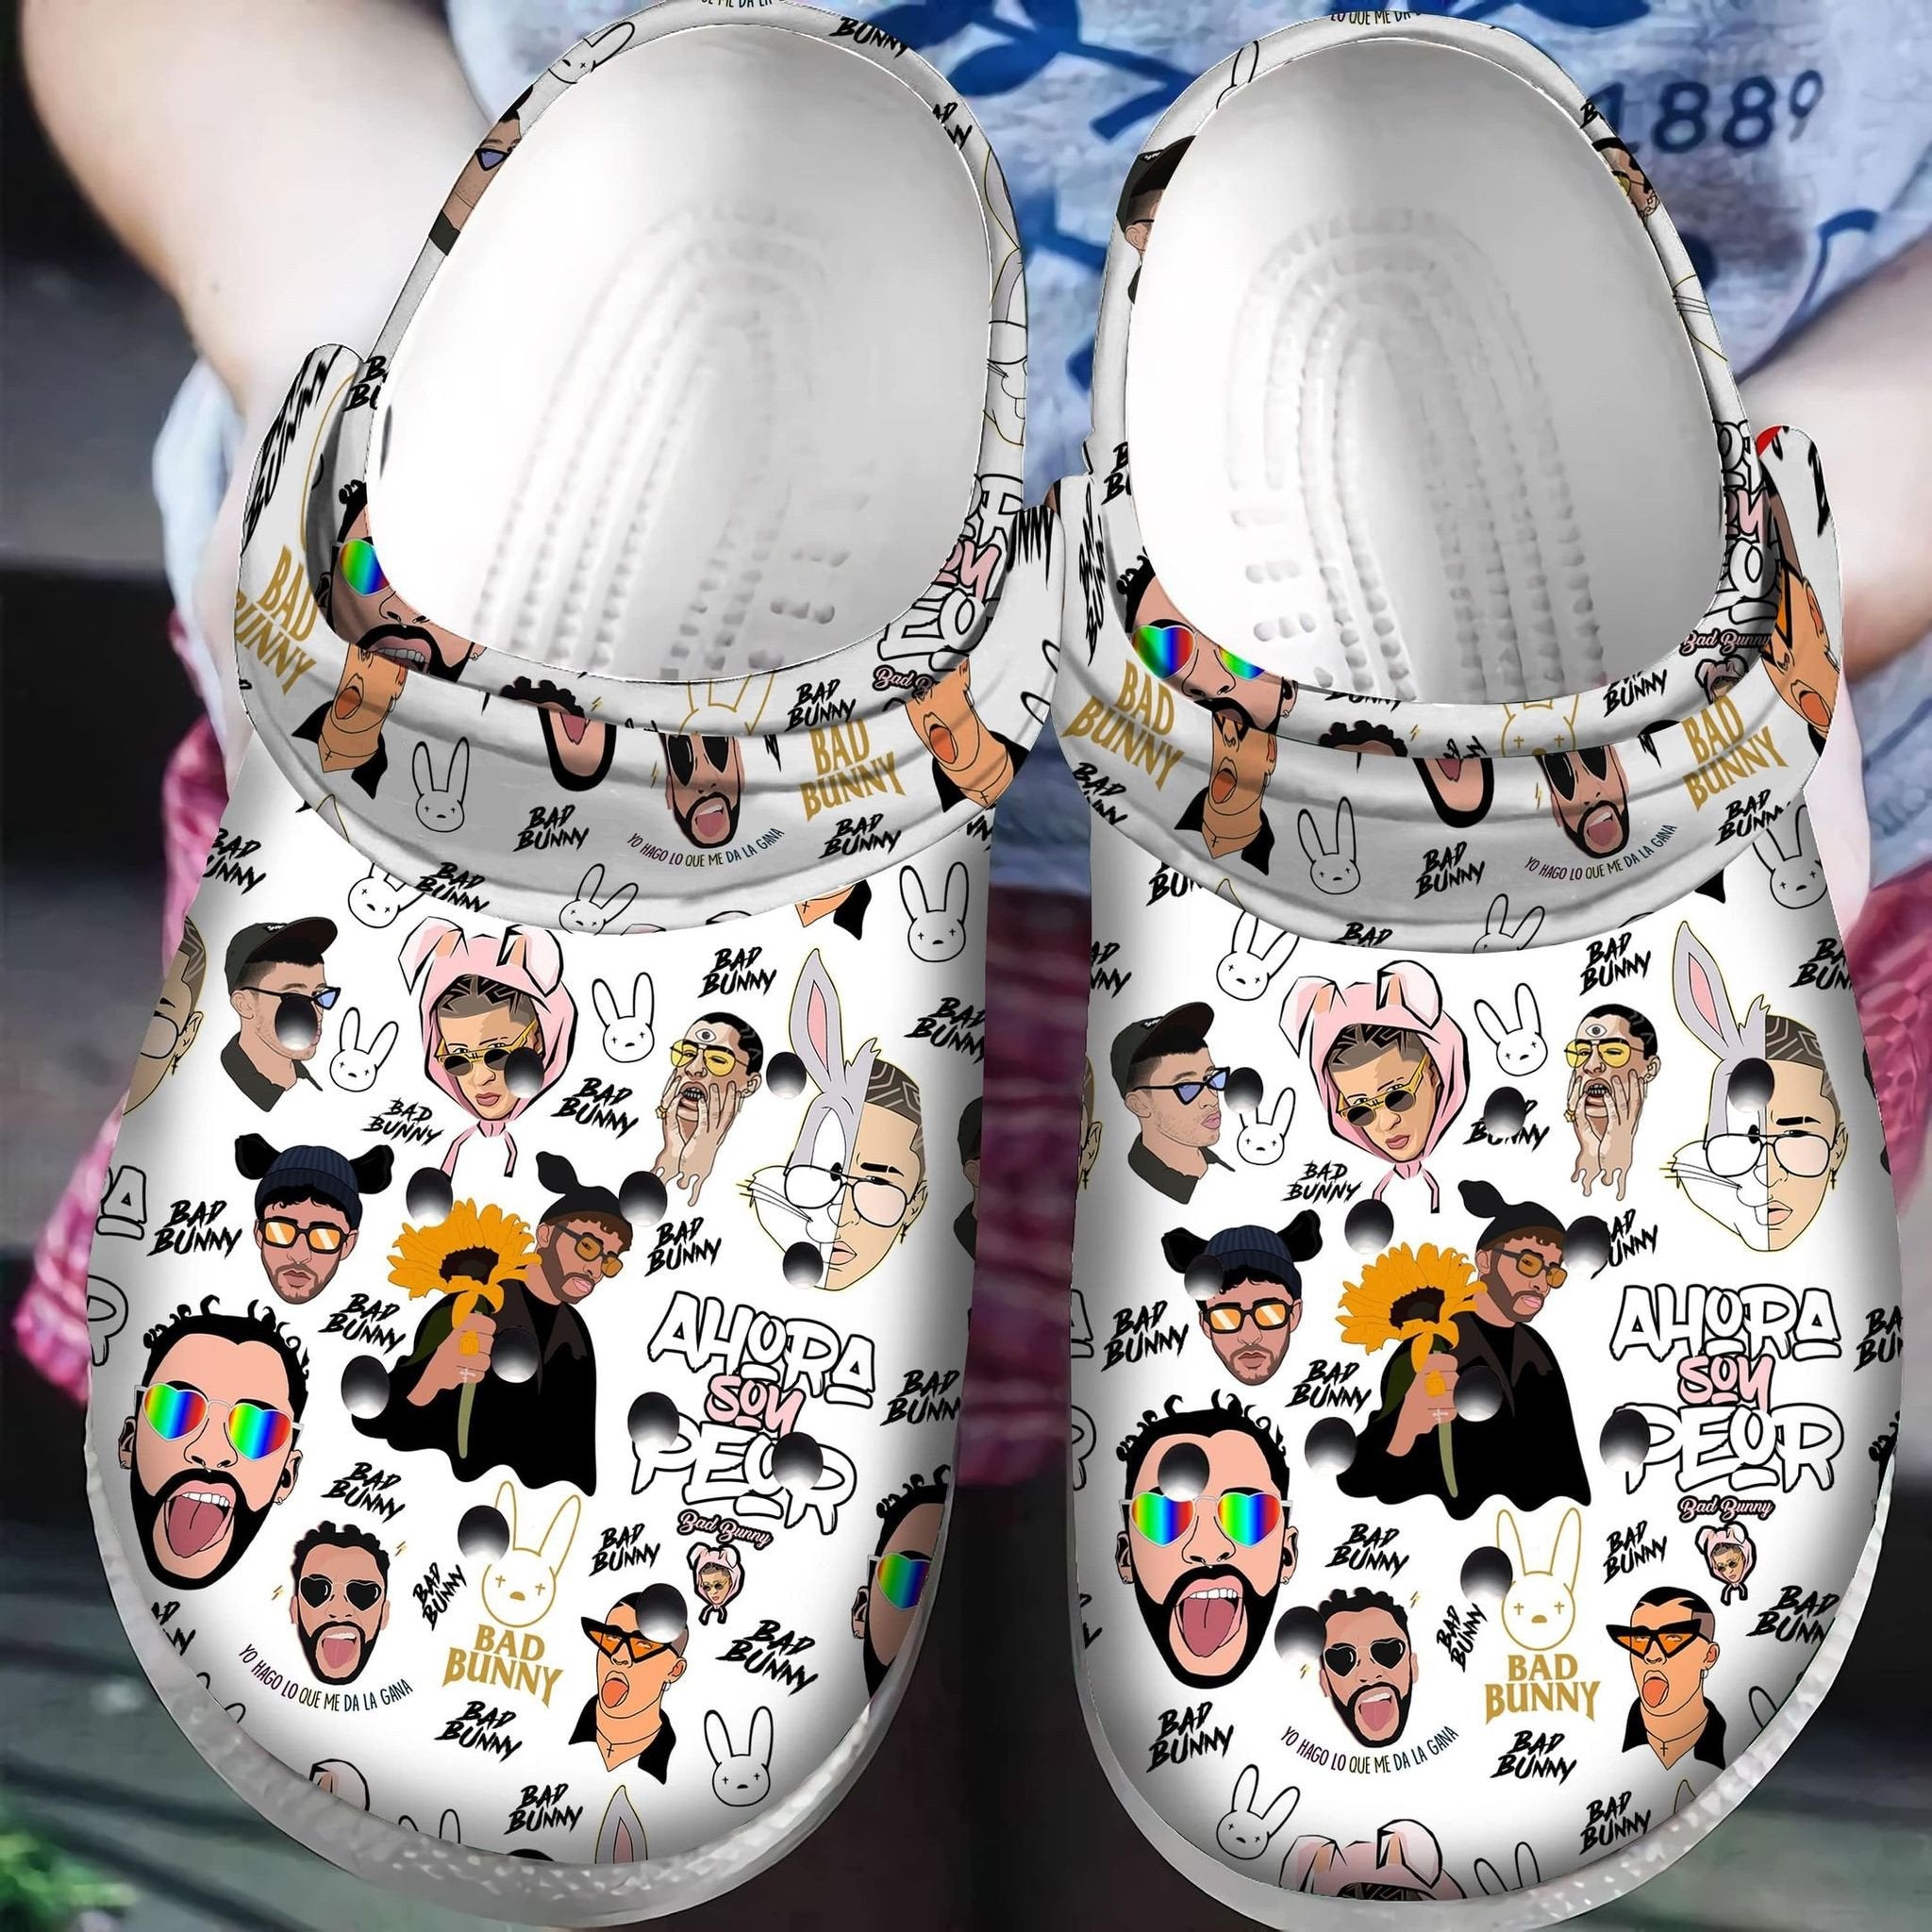 Soy Peor Bad Bunny Gift For Fan Classic Water Rubber 3D Crocband Clog